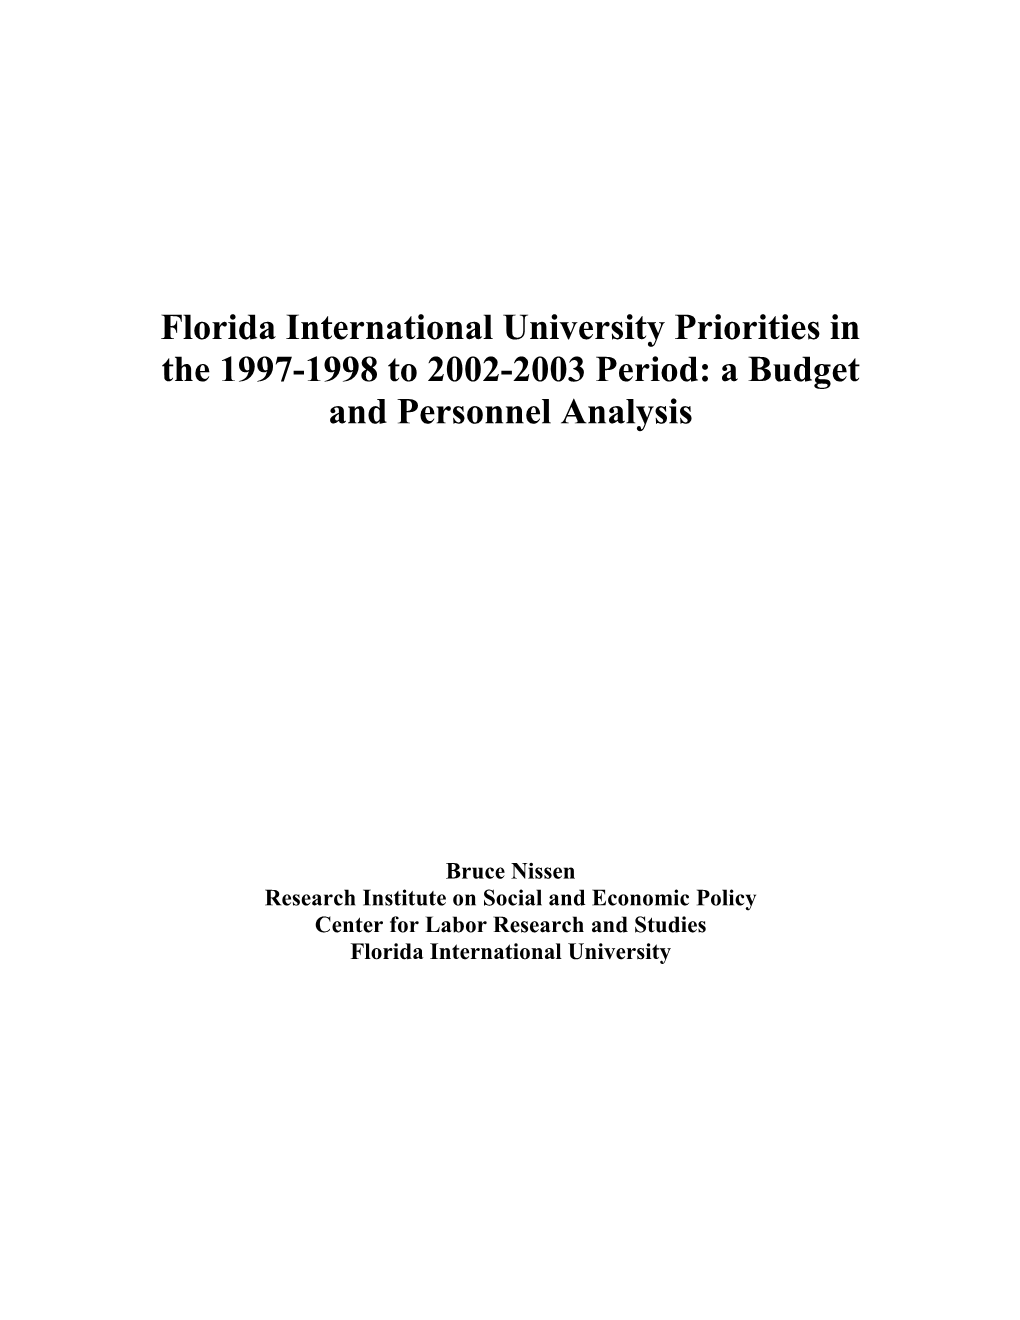 Florida International University Priorities in the 1997-1998 to 2002-2003 Period: a Budget